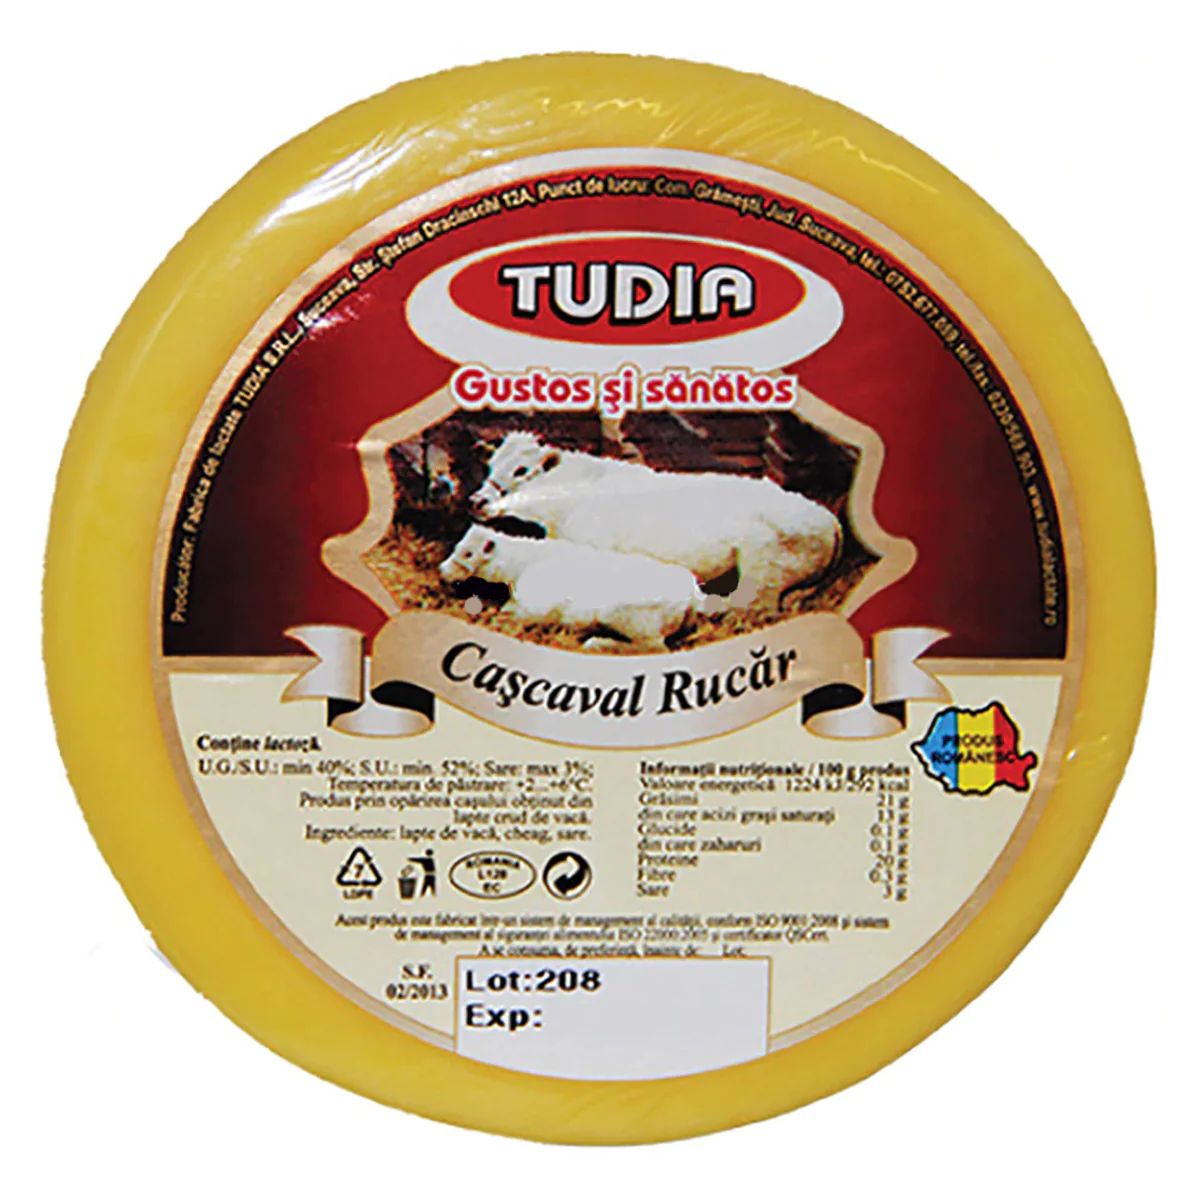 Packaged Tudia - Rucar Cheese 400g wheel with label and branding.